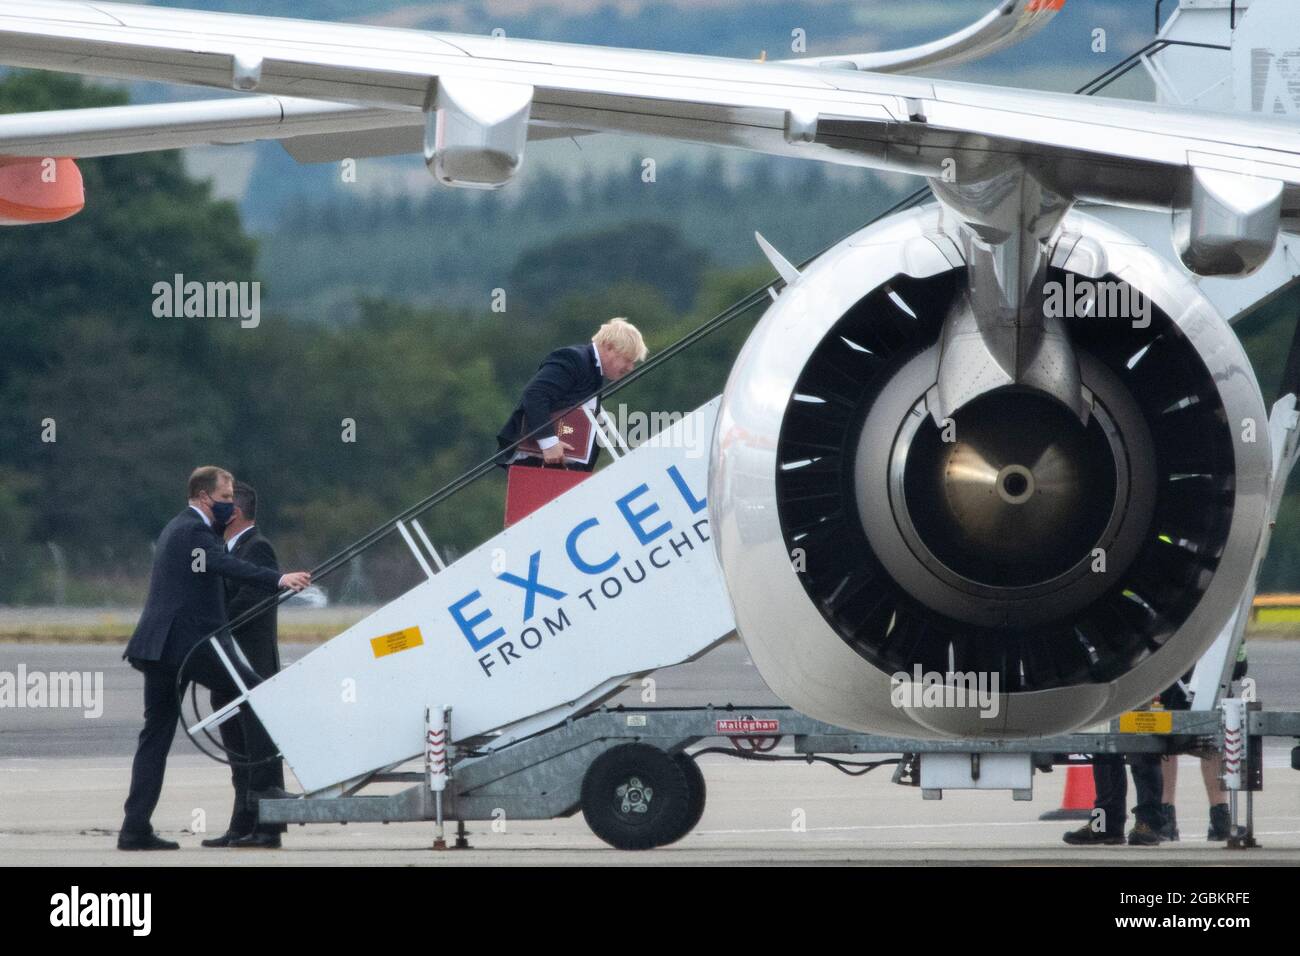 Glasgow, Scotland, UK. 4th Aug, 2021. PICTURED: UK Prime Minister, Rt Hon Boris Johnson MP seen climbing up the steps of the Union Jack private plane Airbus A321, en route to Aberdeen for the next leg of his Scotland visit. Credit: Colin Fisher/Alamy Live News Stock Photo